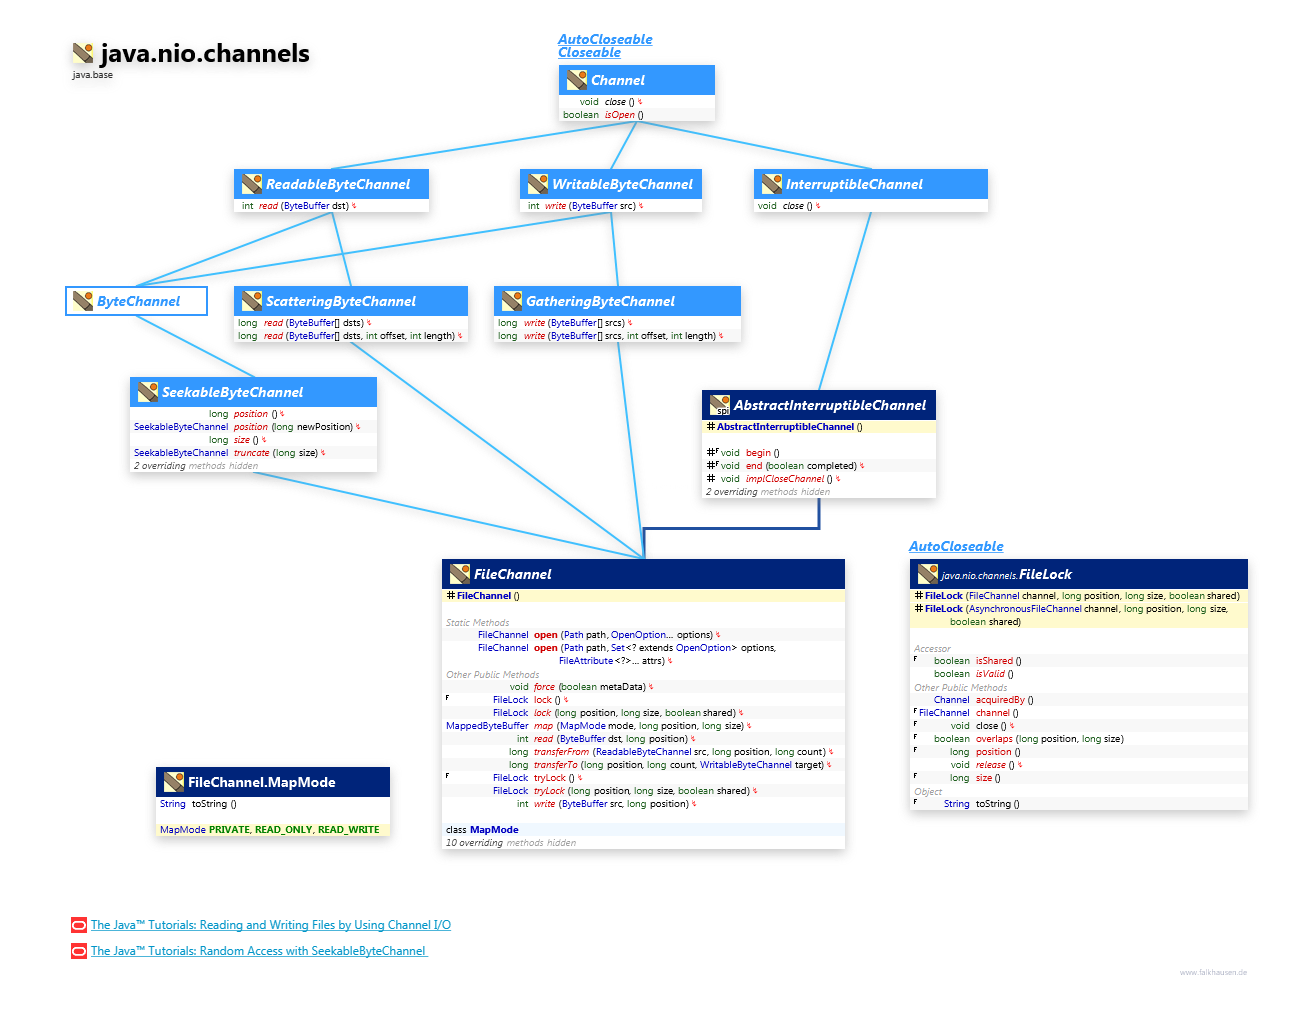 java.nio.channels FileChannel class diagram and api documentation for Java 10